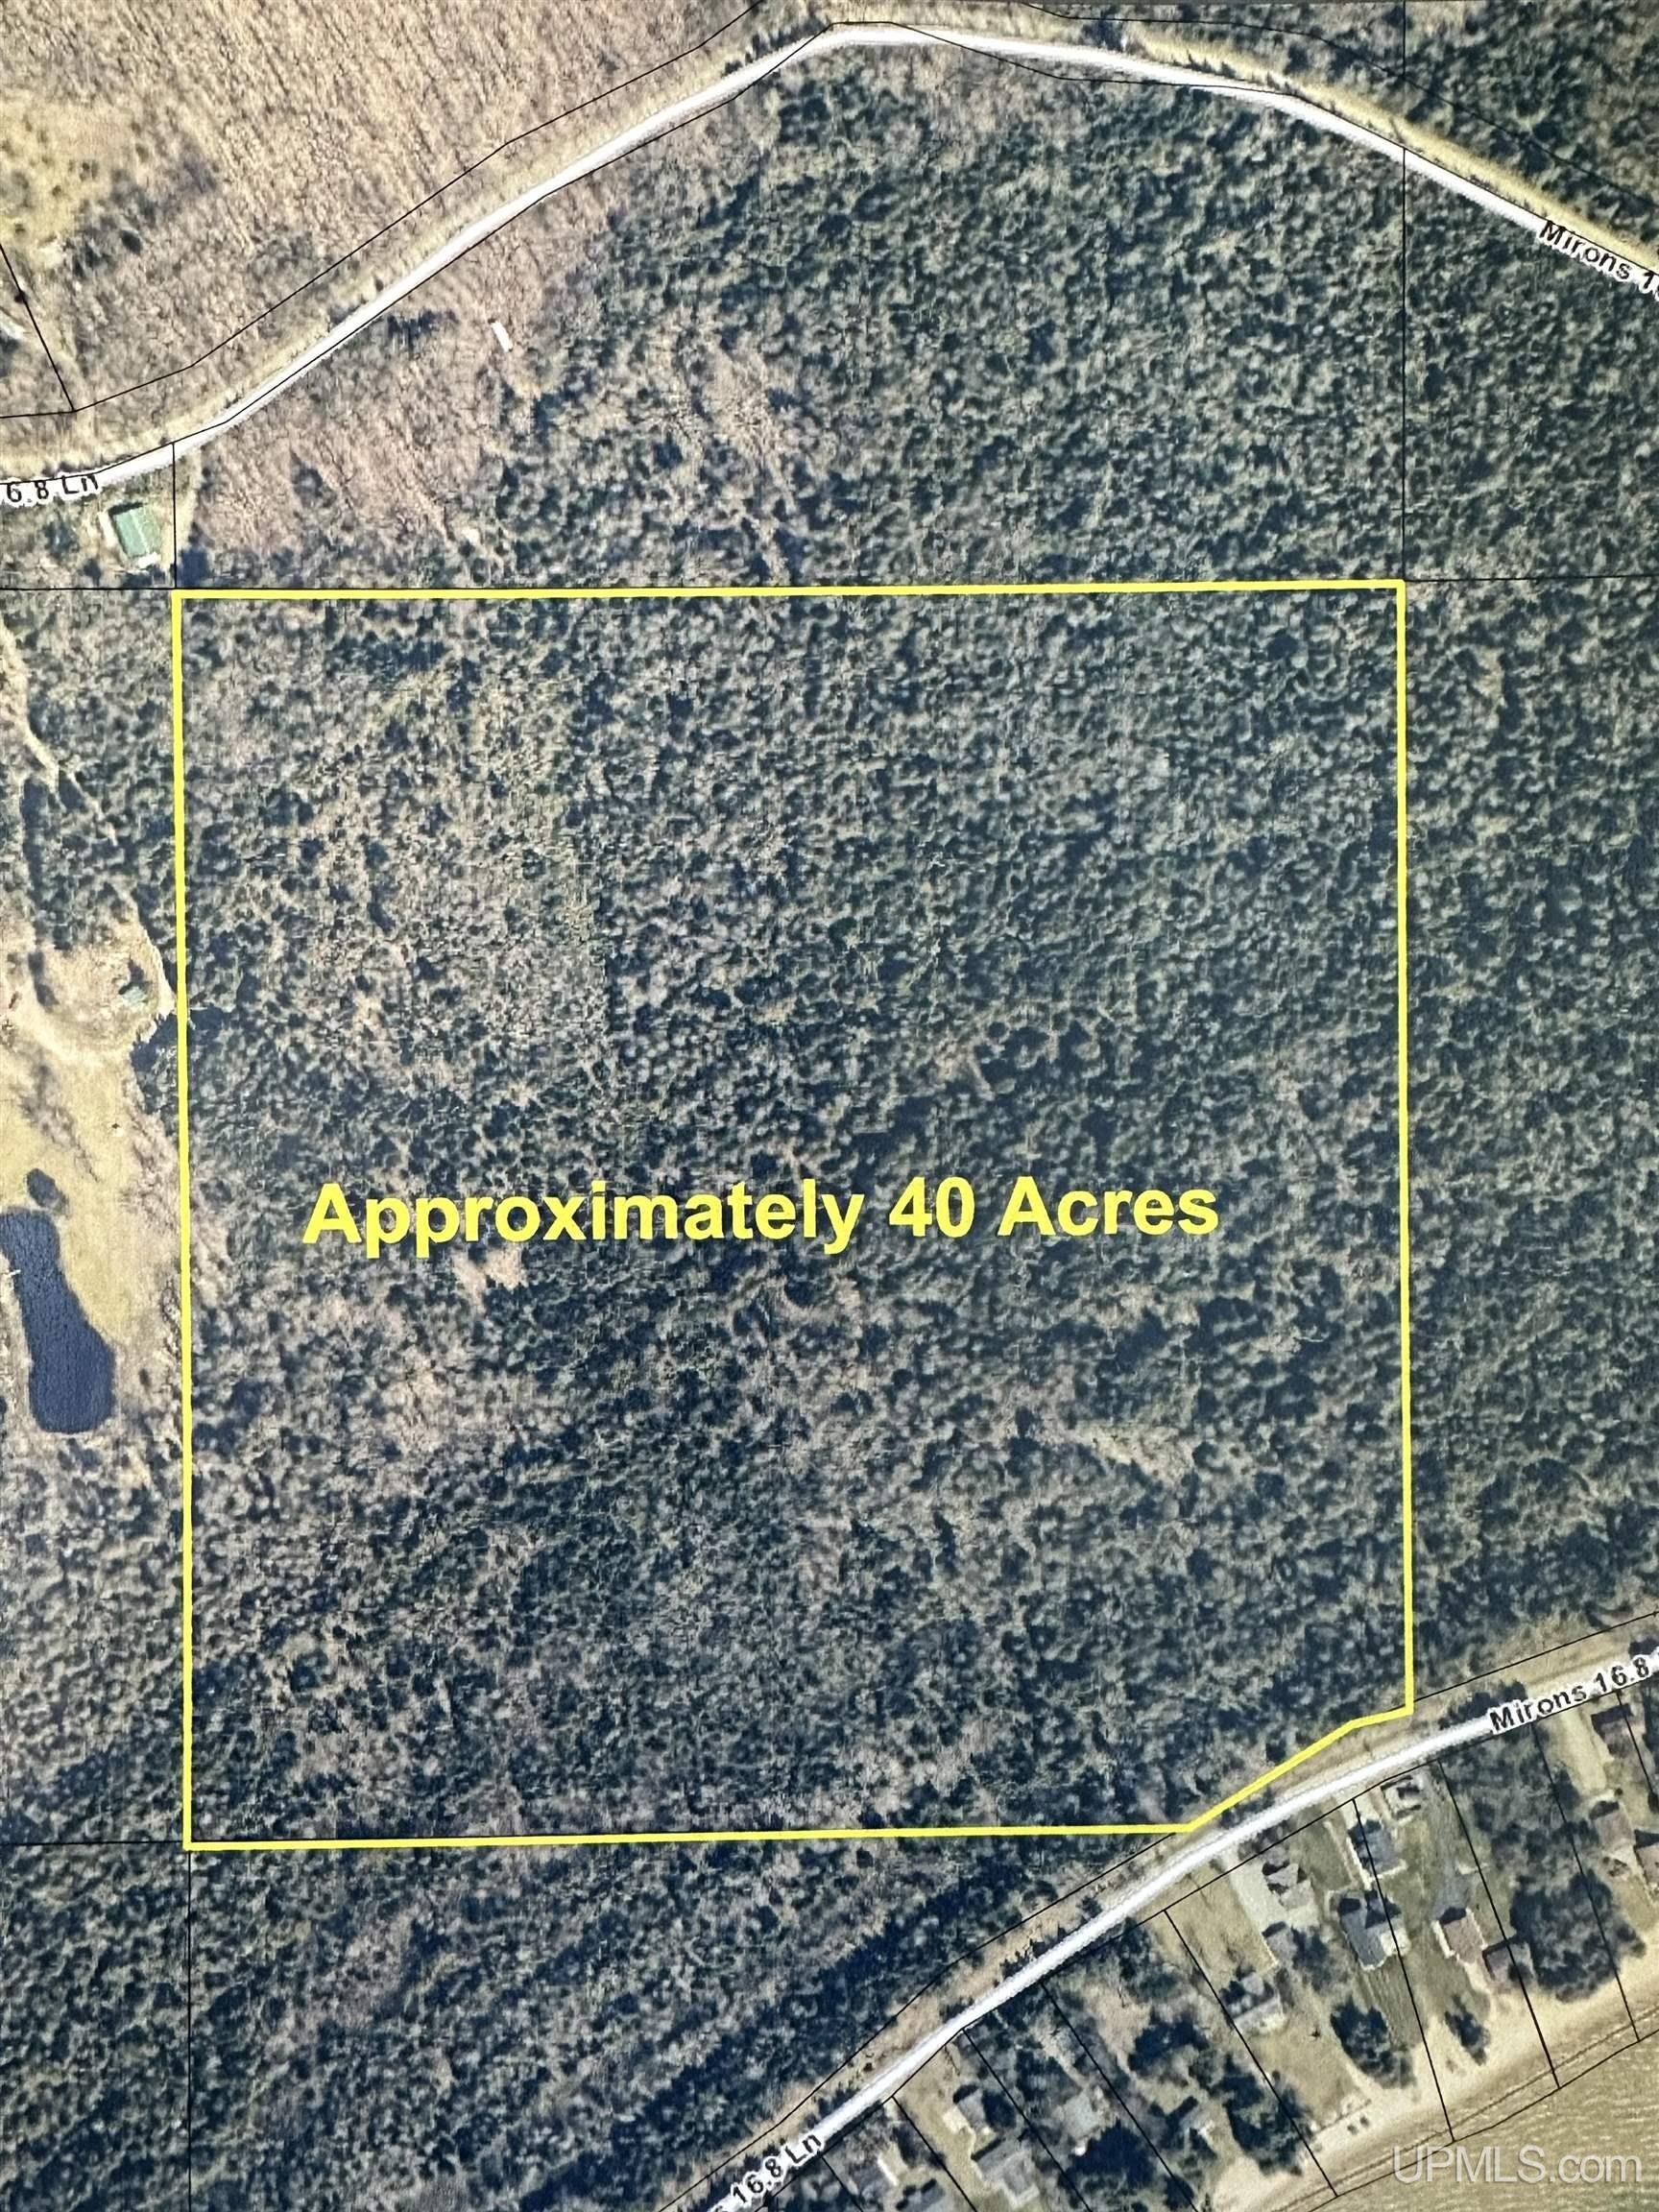 4. 40 Acres At Tbd Mirons 16.8